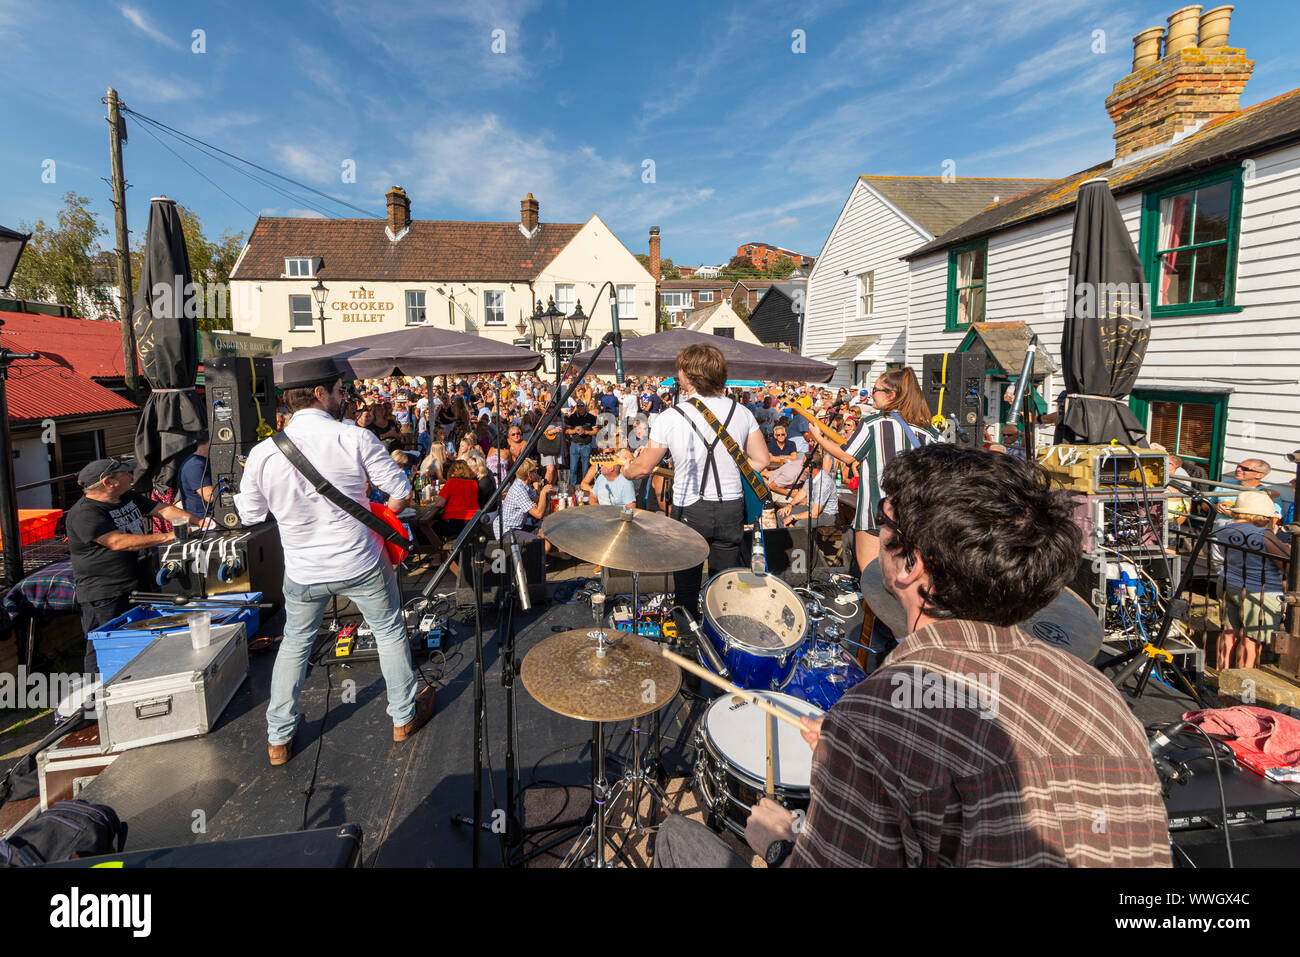 Rock band playing at the Old Leigh Regatta 2019 in Old Leigh, Leigh on Sea, Essex, UK. Crooked Billet pub and large crowd on a sunny day Stock Photo